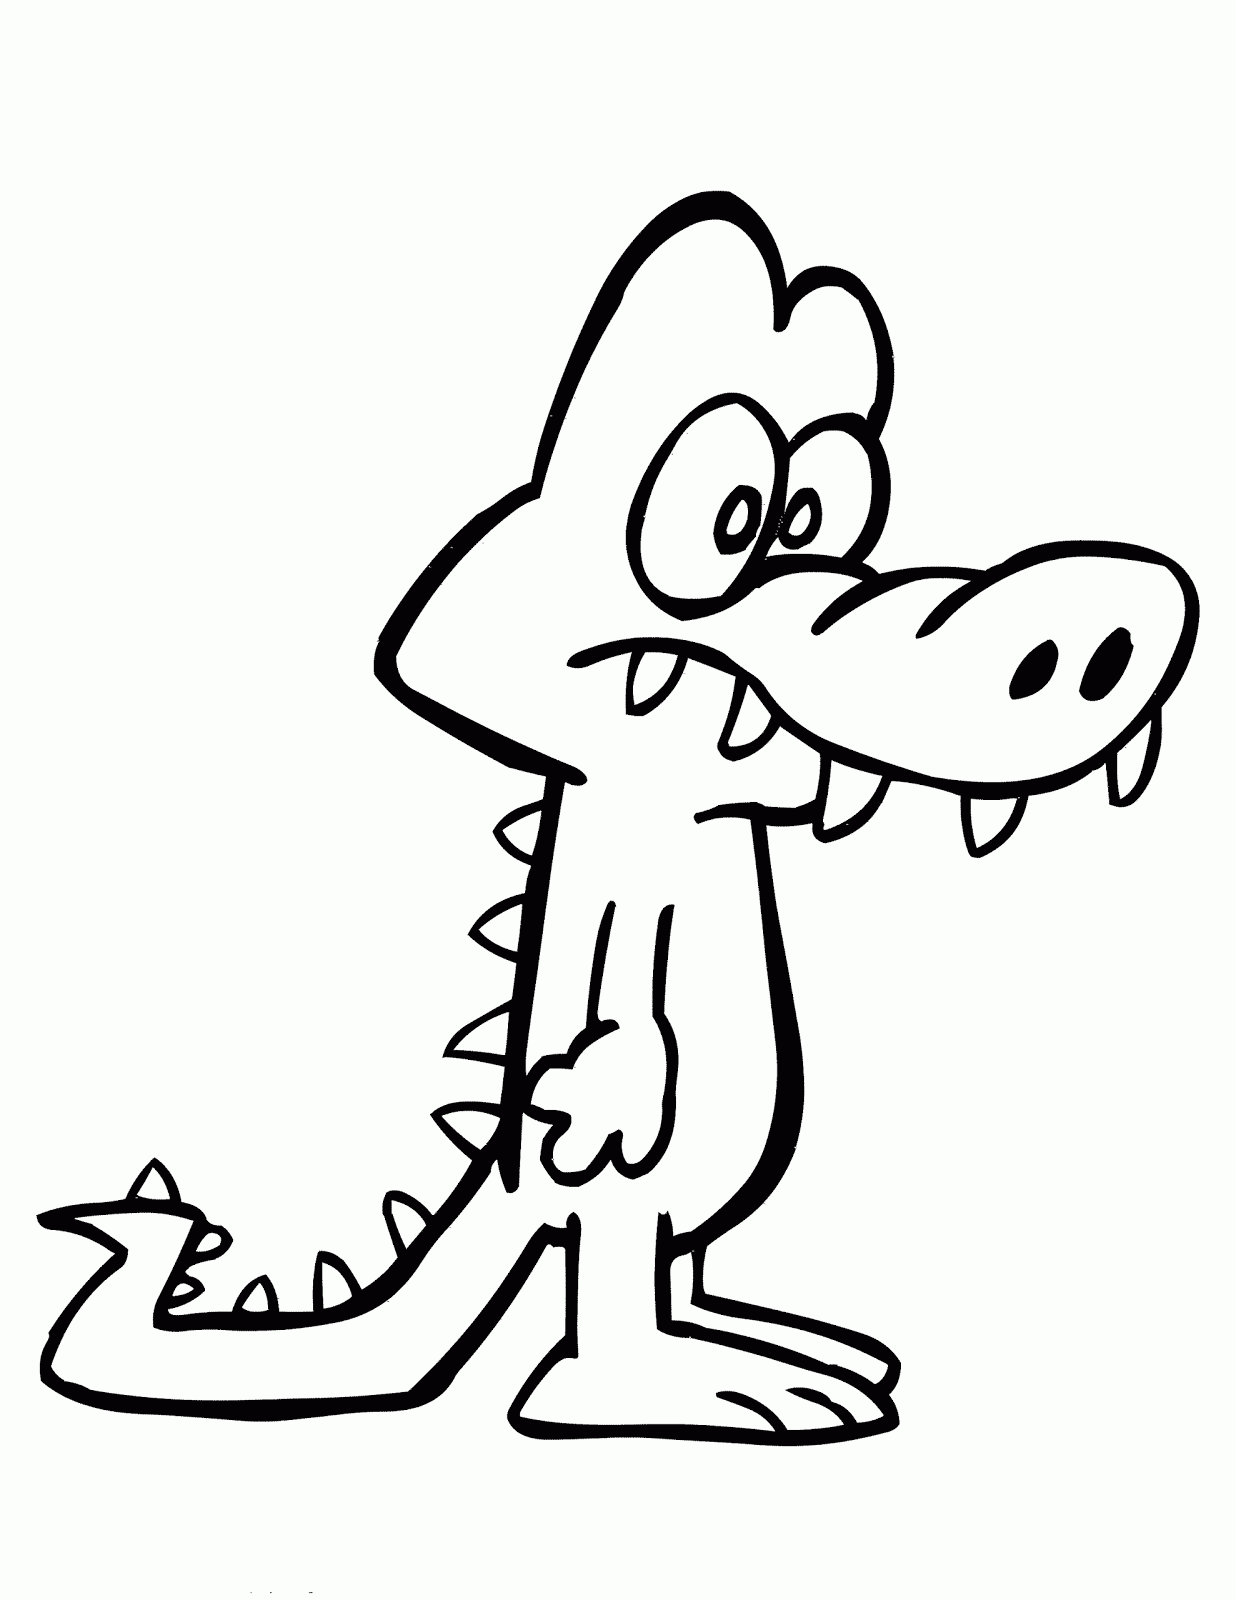 Funny Crocodile | Animals Coloring Pages